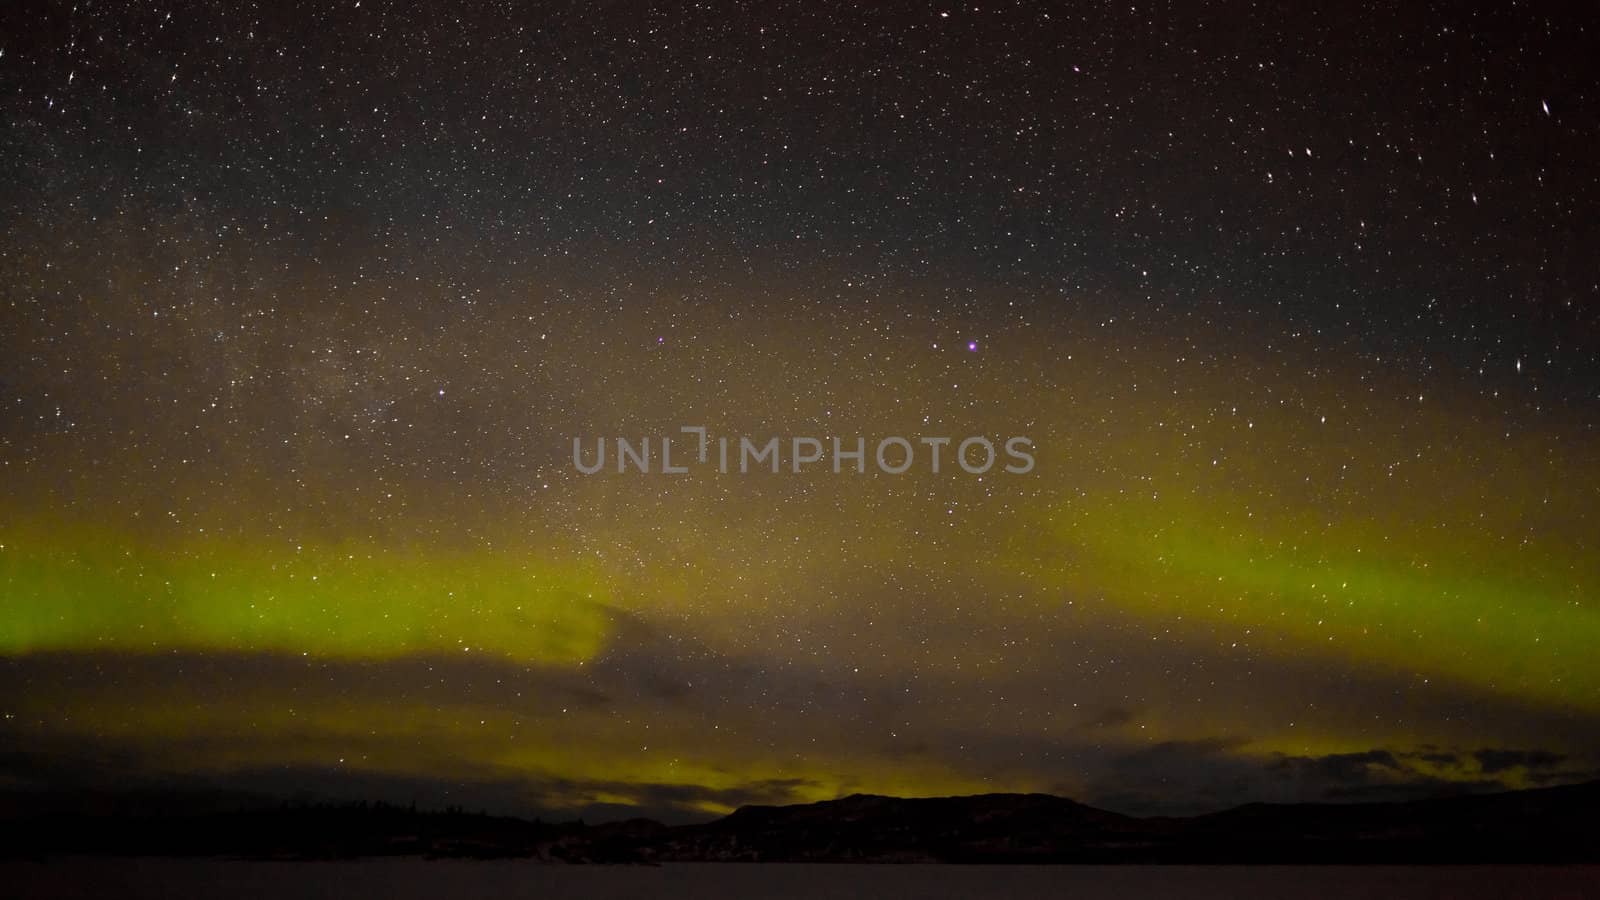 Night sky with myriad of stars with northern lights (aurora borealis) substorm above silhouette of hills and clouds.